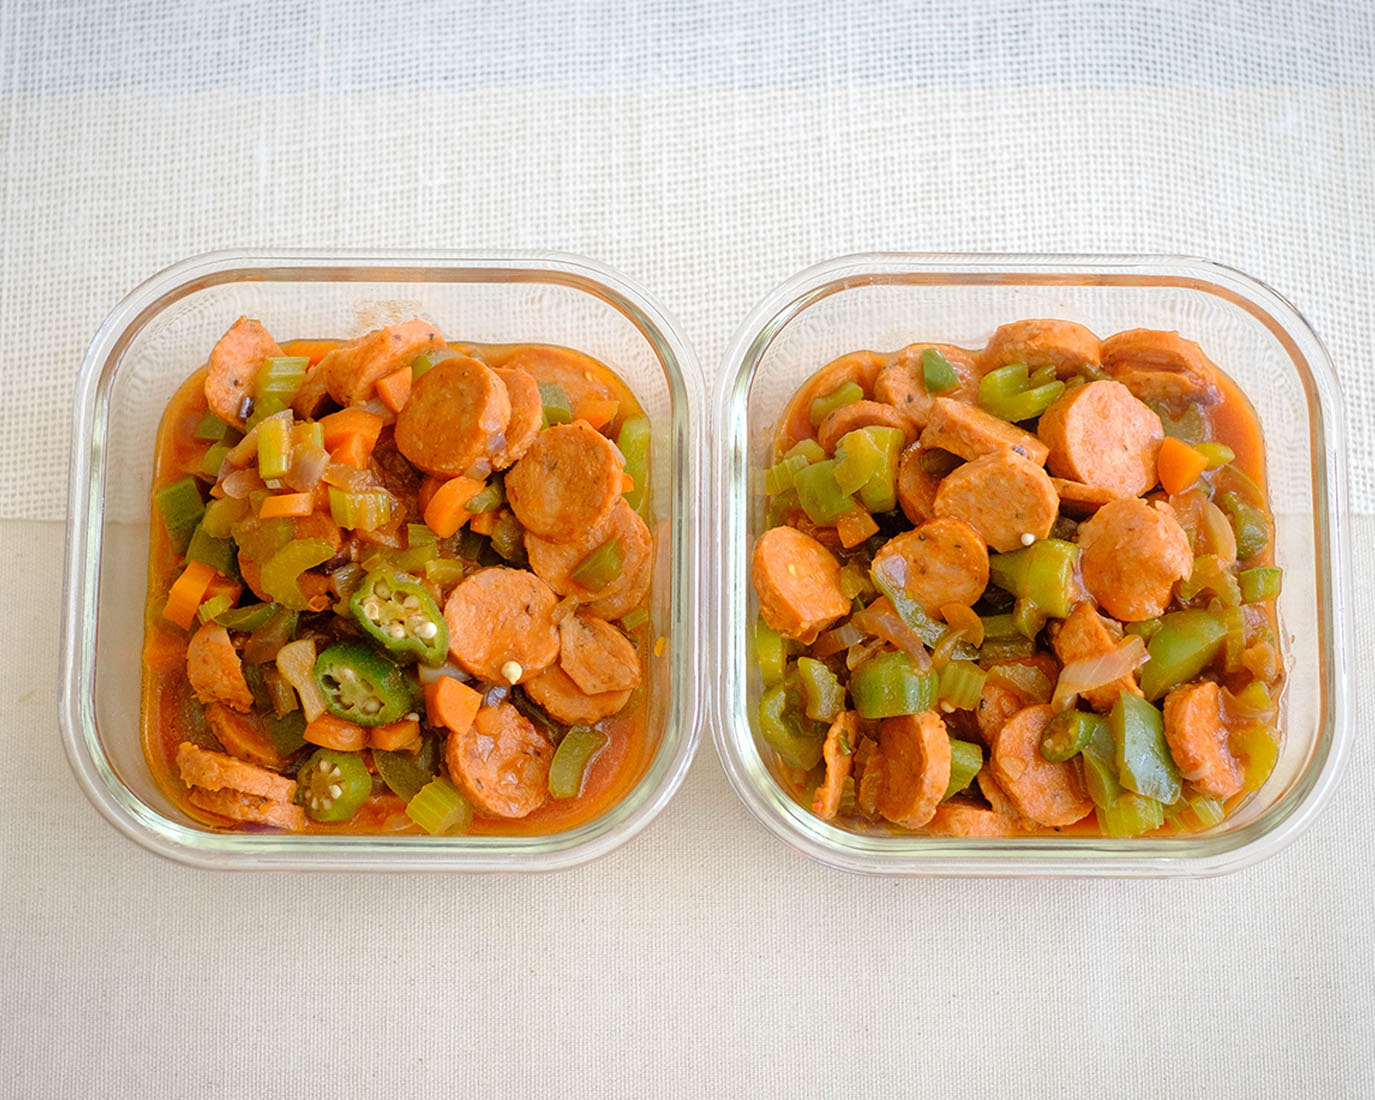 square meal prep containers with cajun sausage stew in tomato sauce with okra and green bell peppers